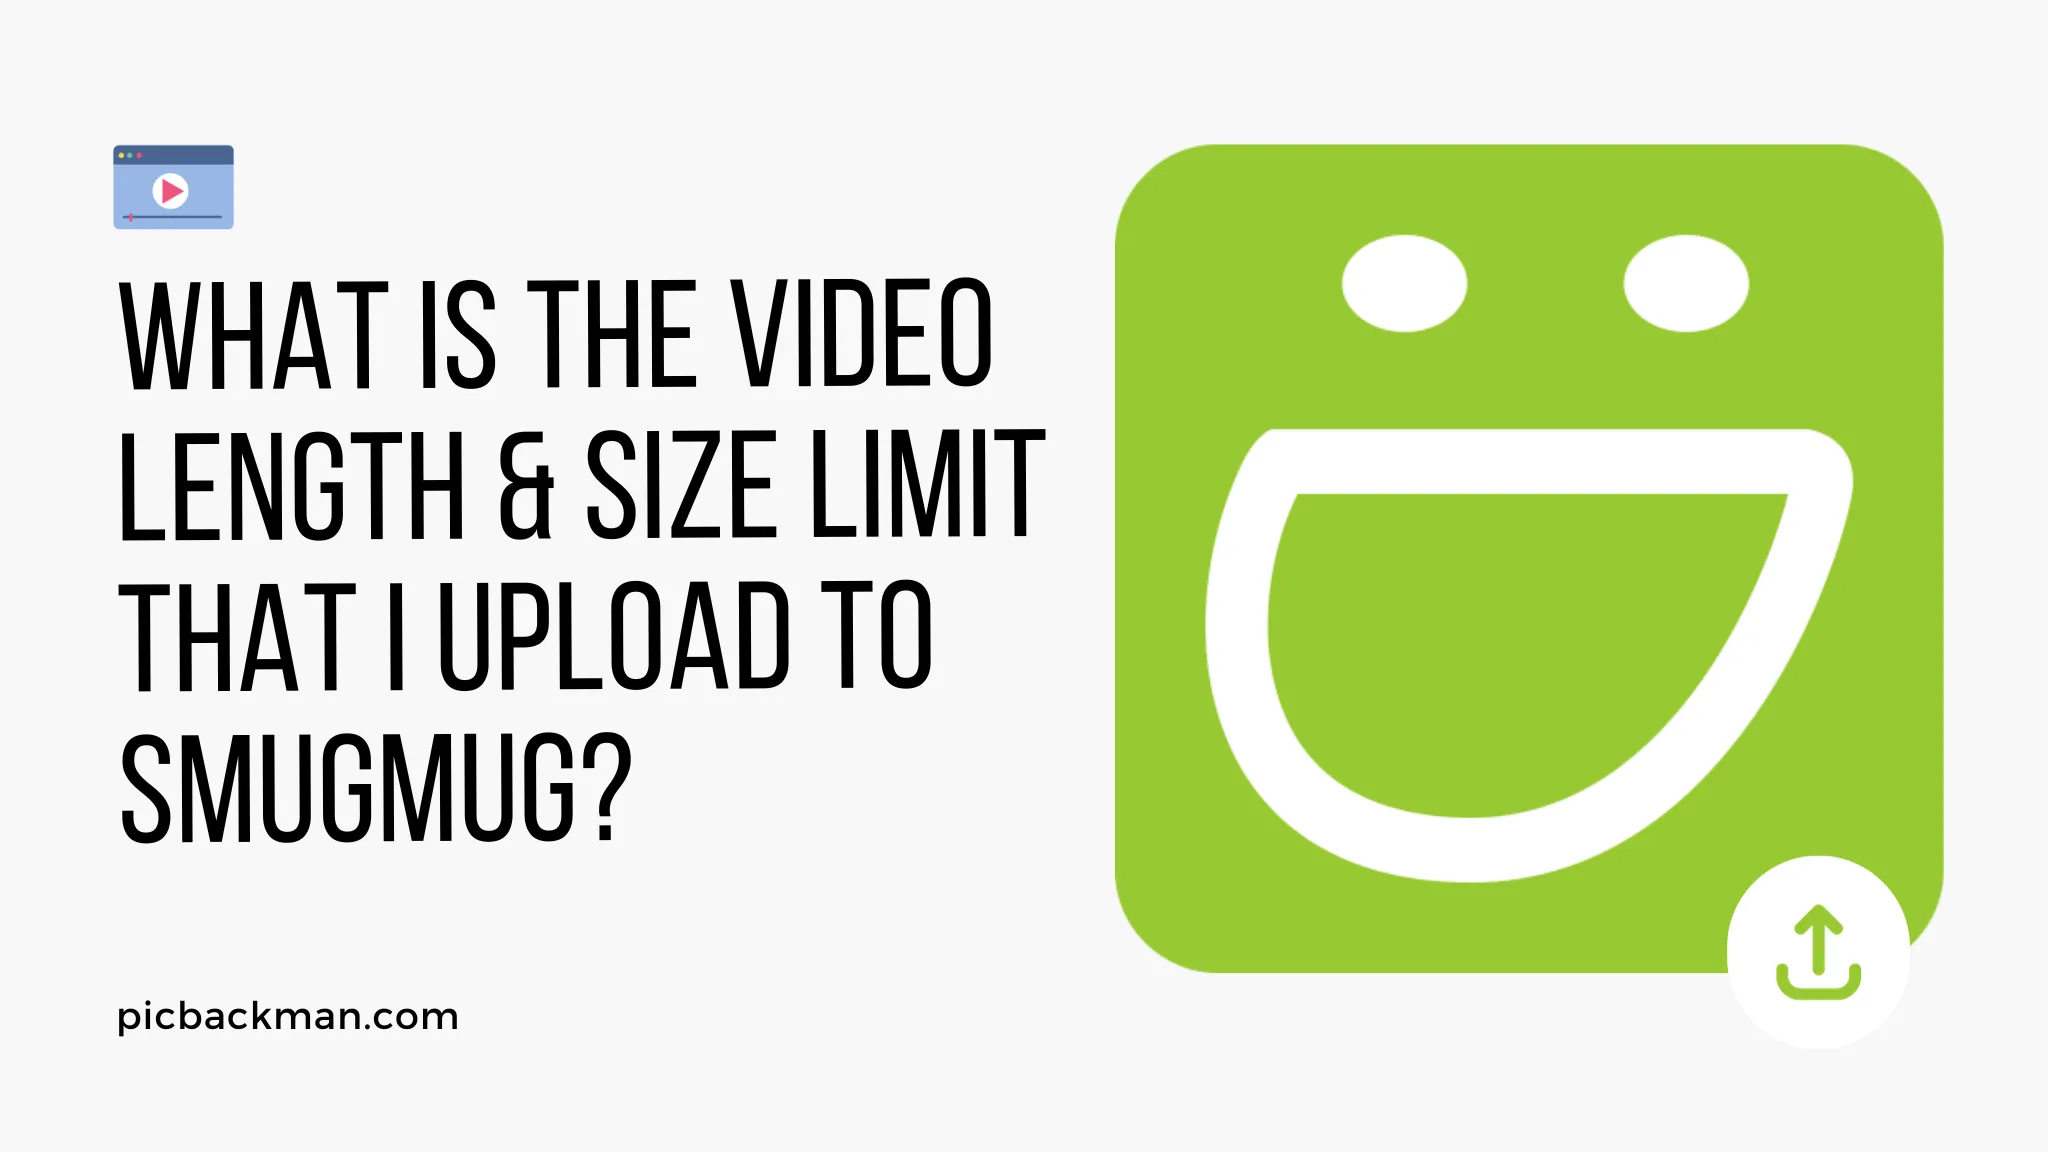 What is the video length & size limit that I upload to SmugMug